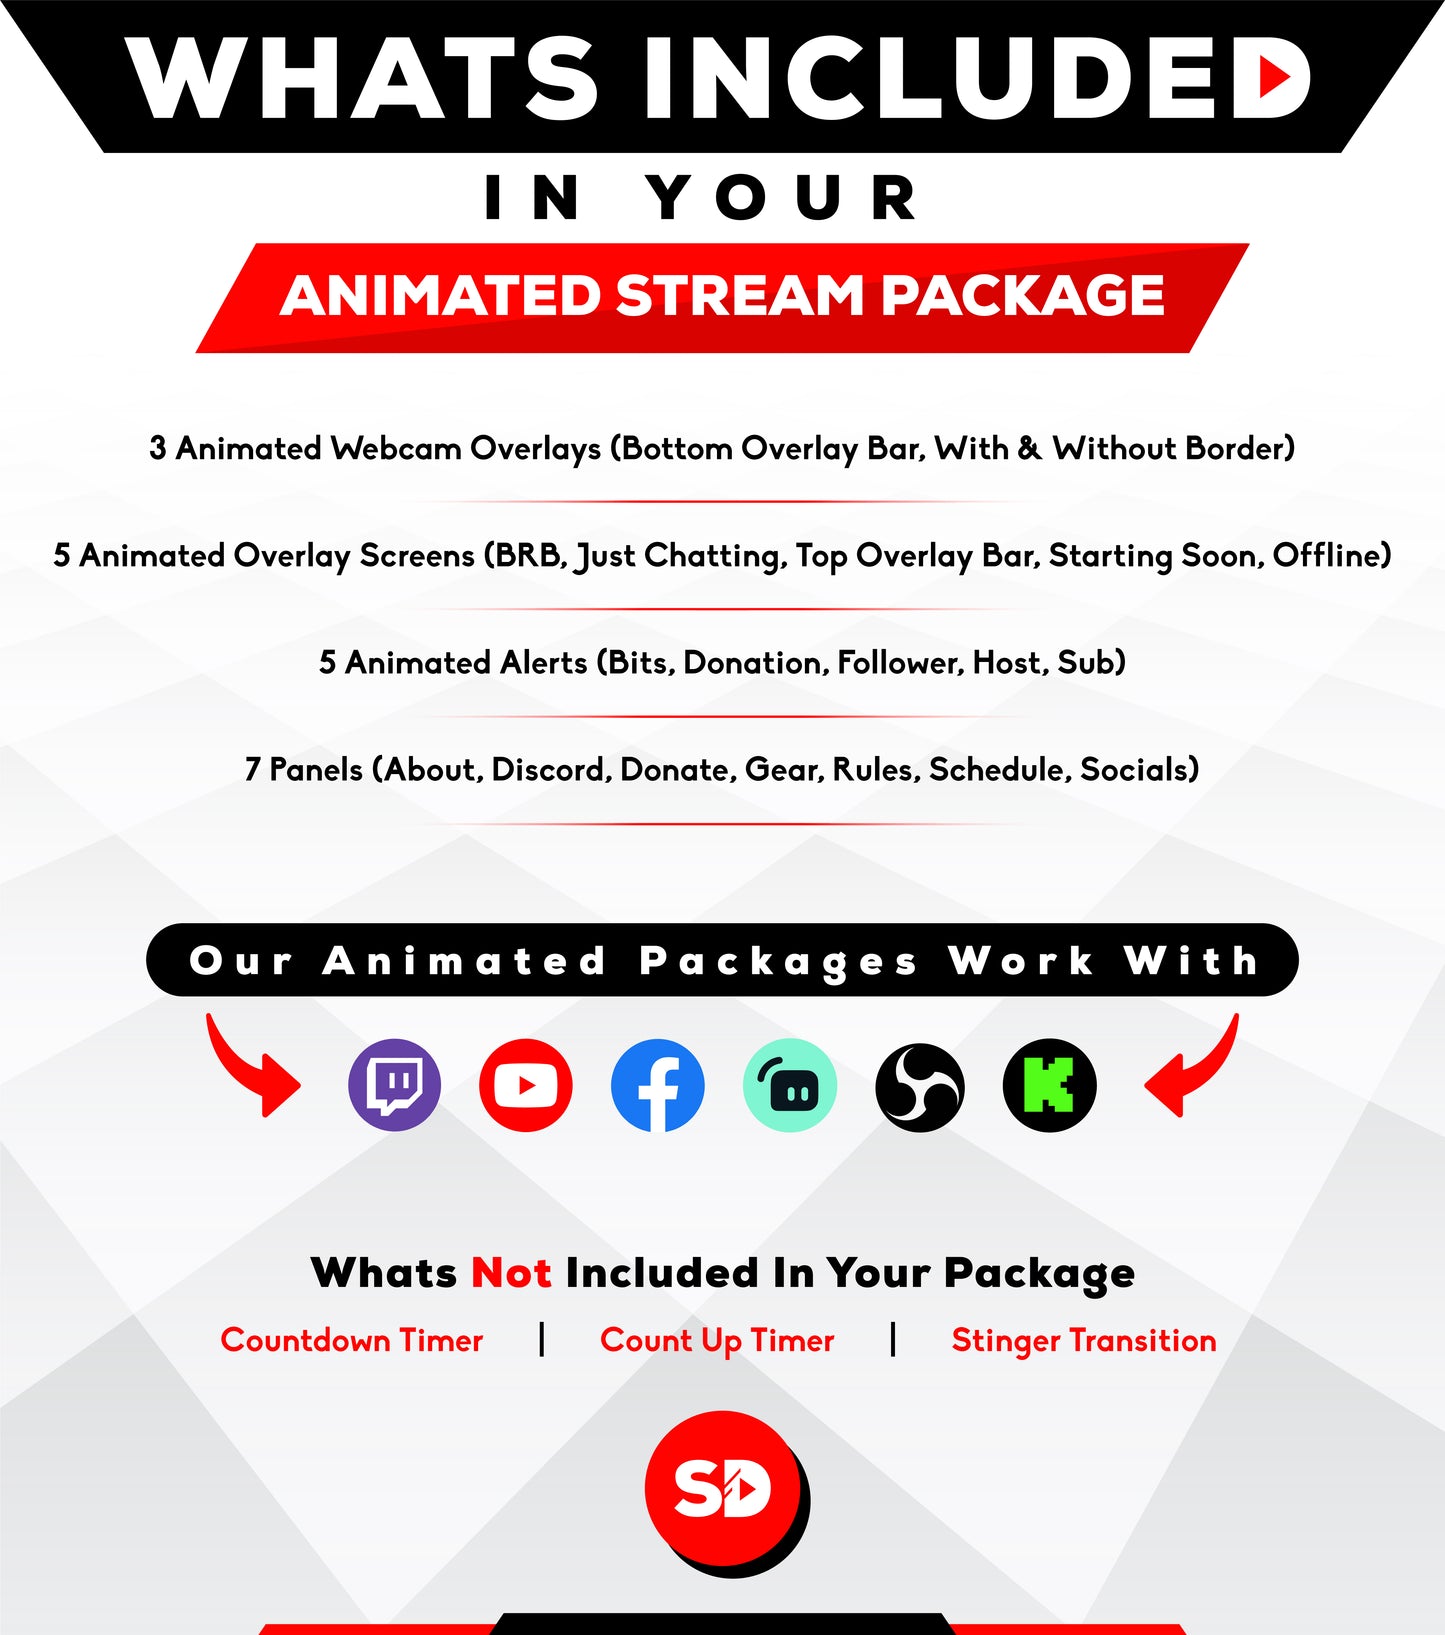 Animated Stream Overlay Package - "Arctic" - Red & White